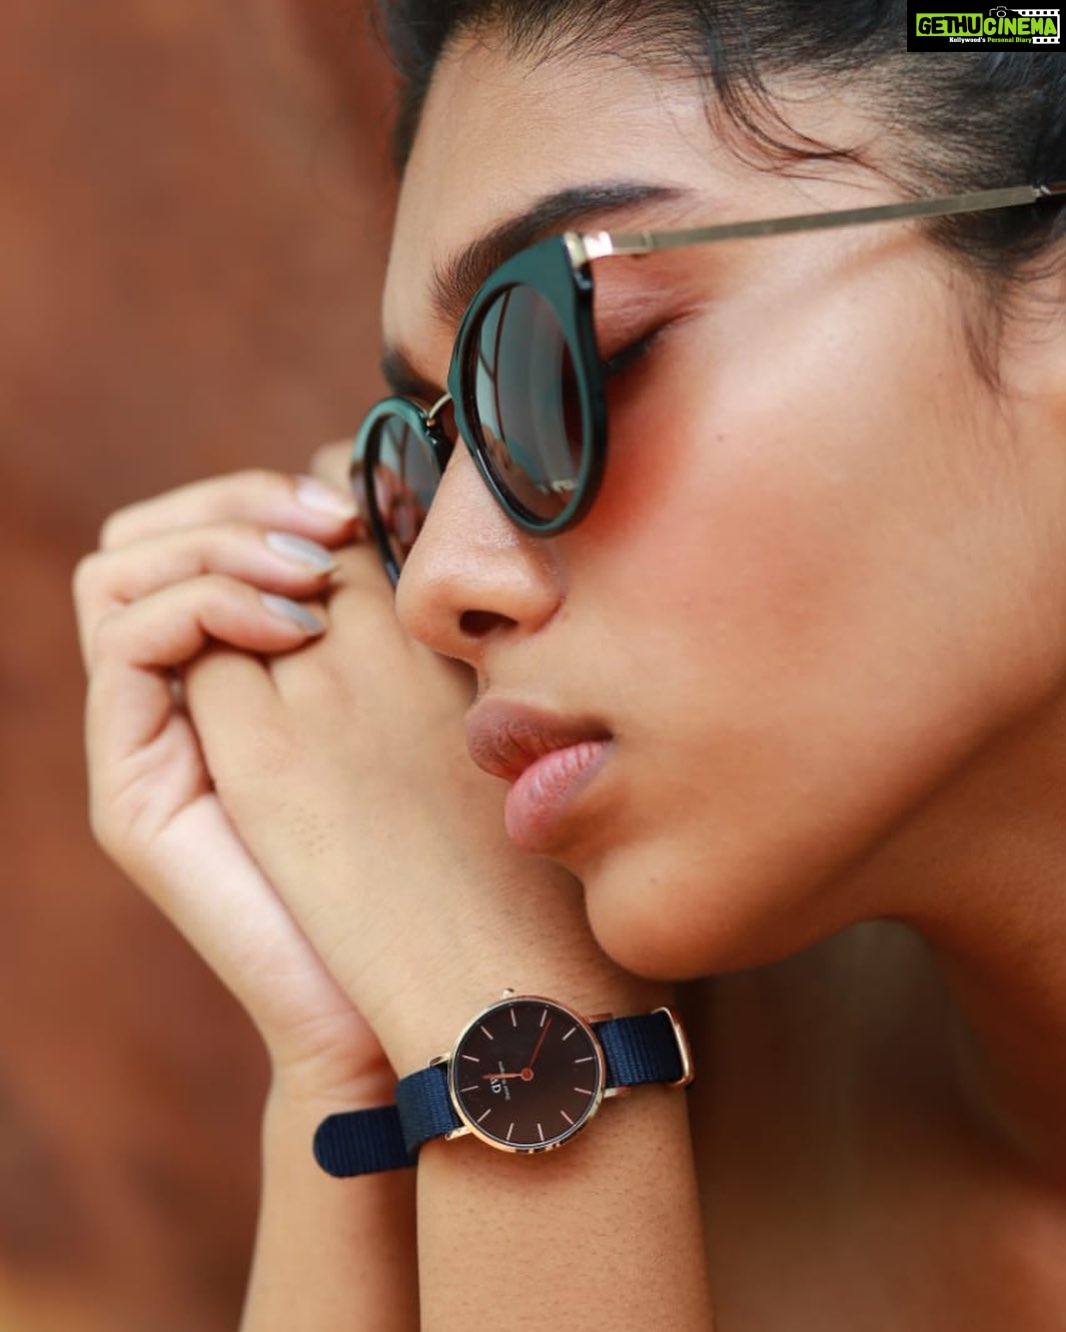 Dushara Vijayan Instagram - This season's Cricket World Cup,also includes an exciting series from @danielwellington with their Cricket Blue Bayswater Watch Collection! Grab them using my special Promo code from their website,offer does not stand for long! Get your hands on them soon! Promo Code: DWXDUSHARA #danielwellington #dwxcricket #ourmomentisnow